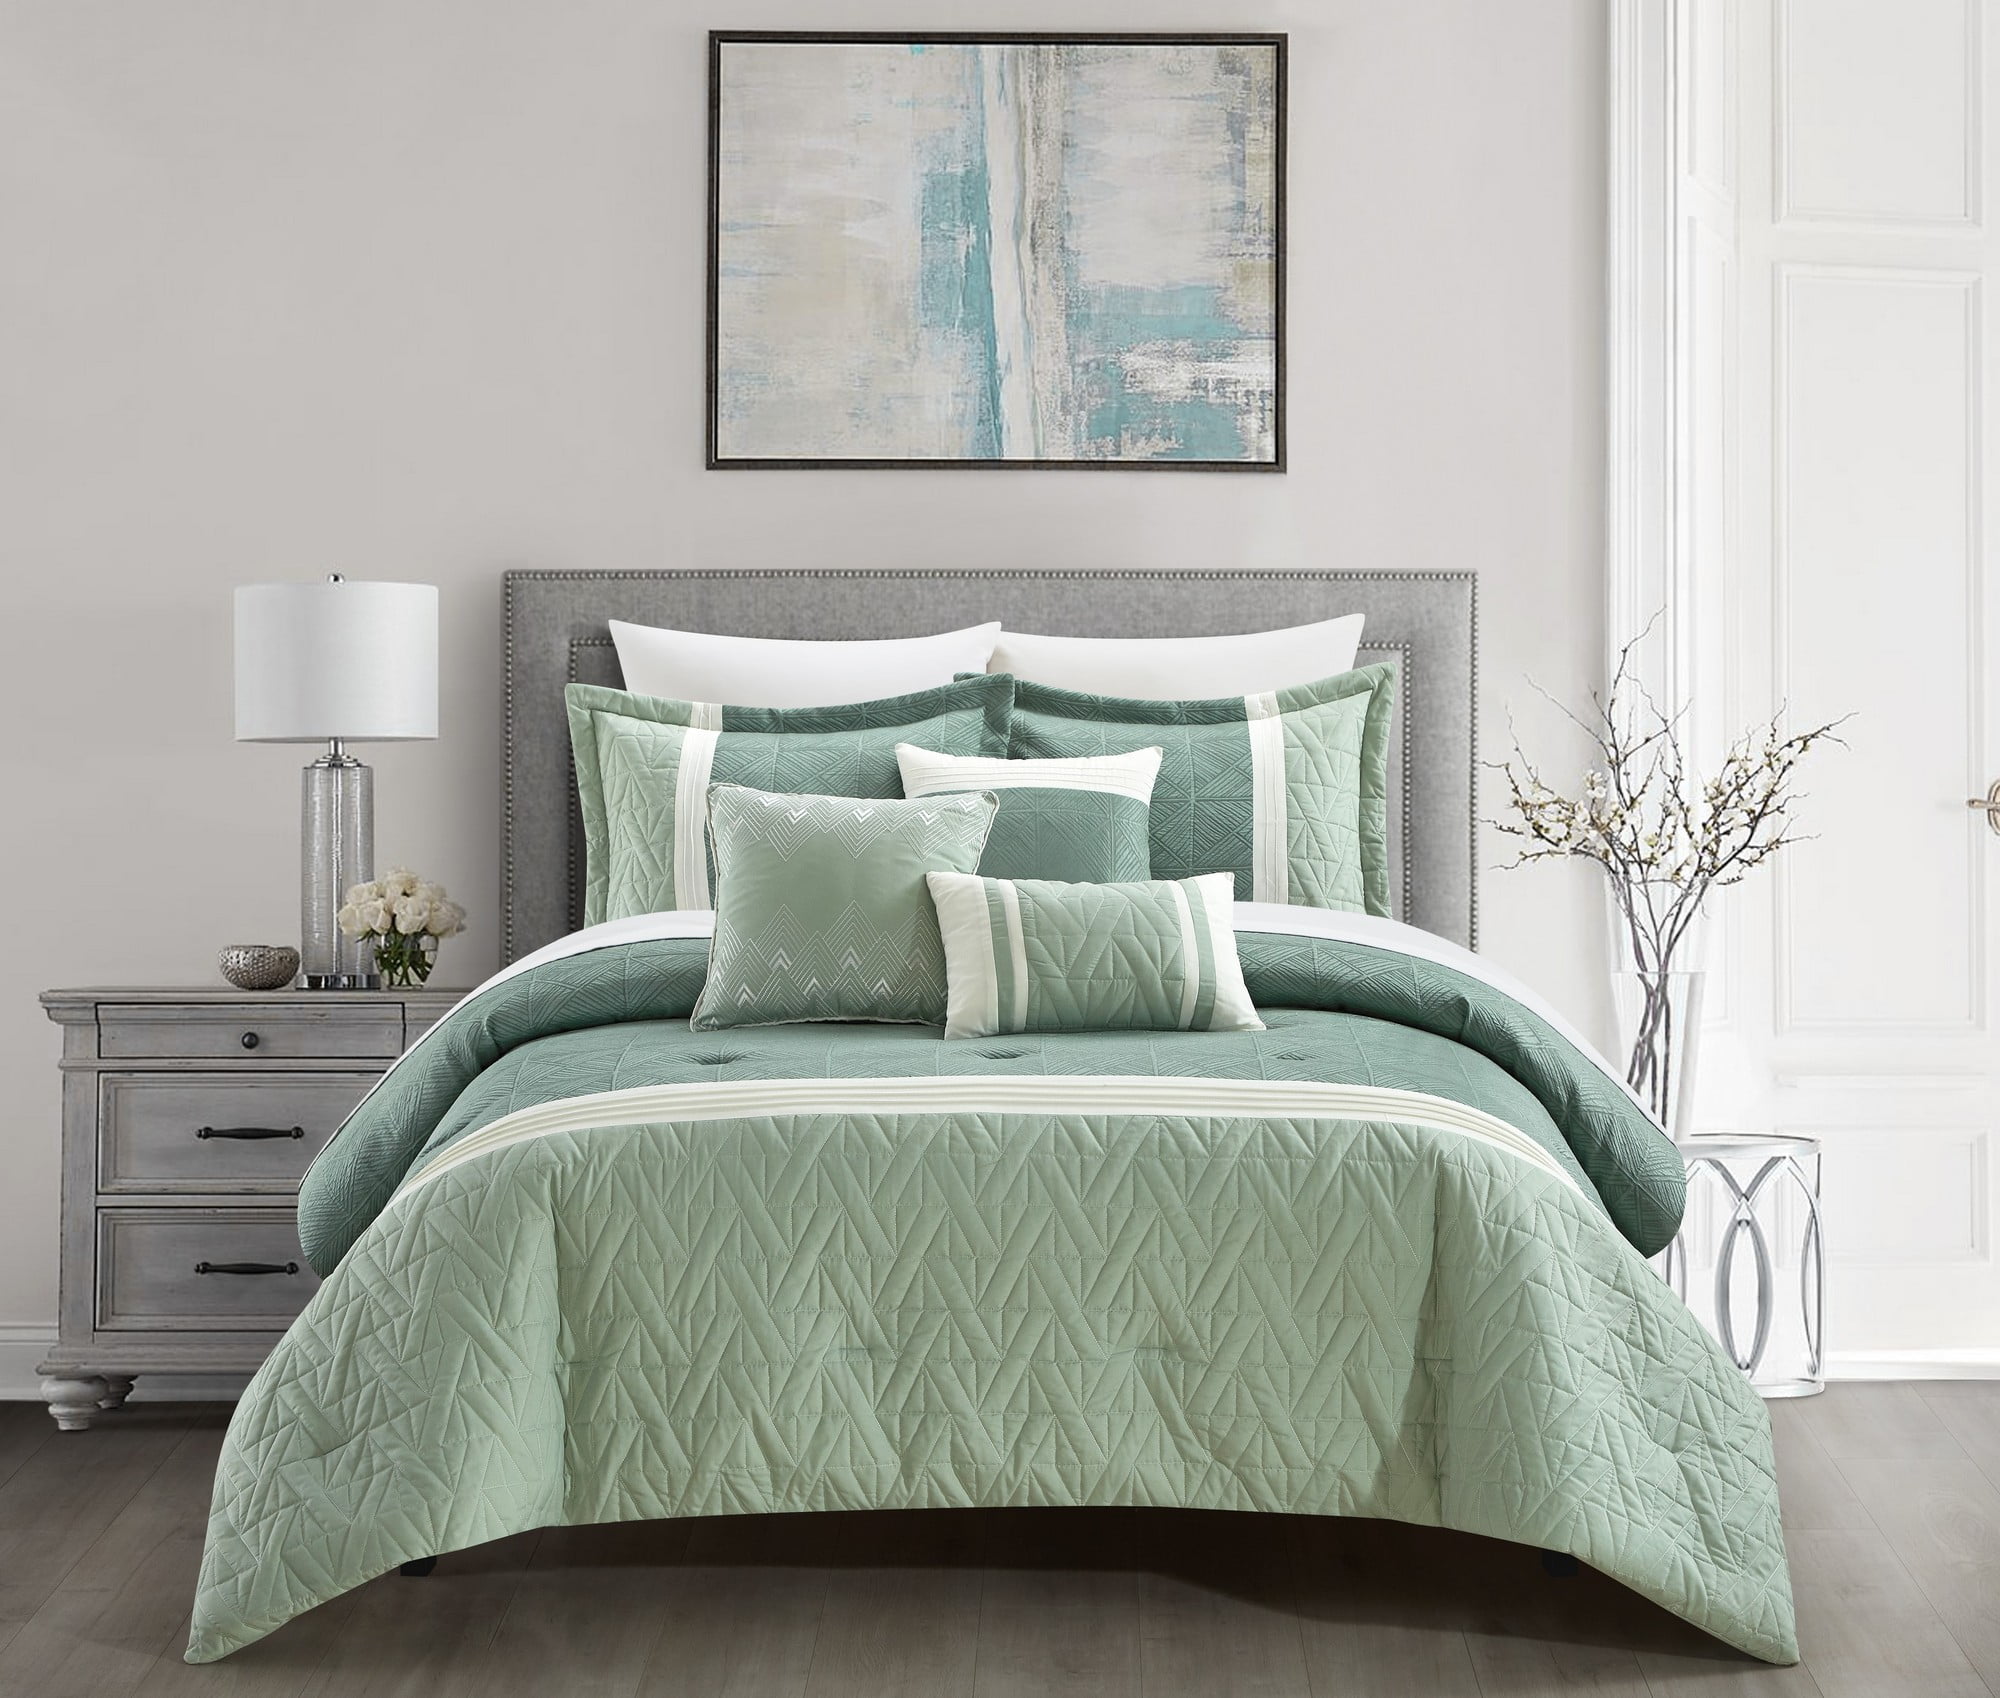 Chic Home Brice Piece Comforter Set Pleated Embroidered Design Bedding